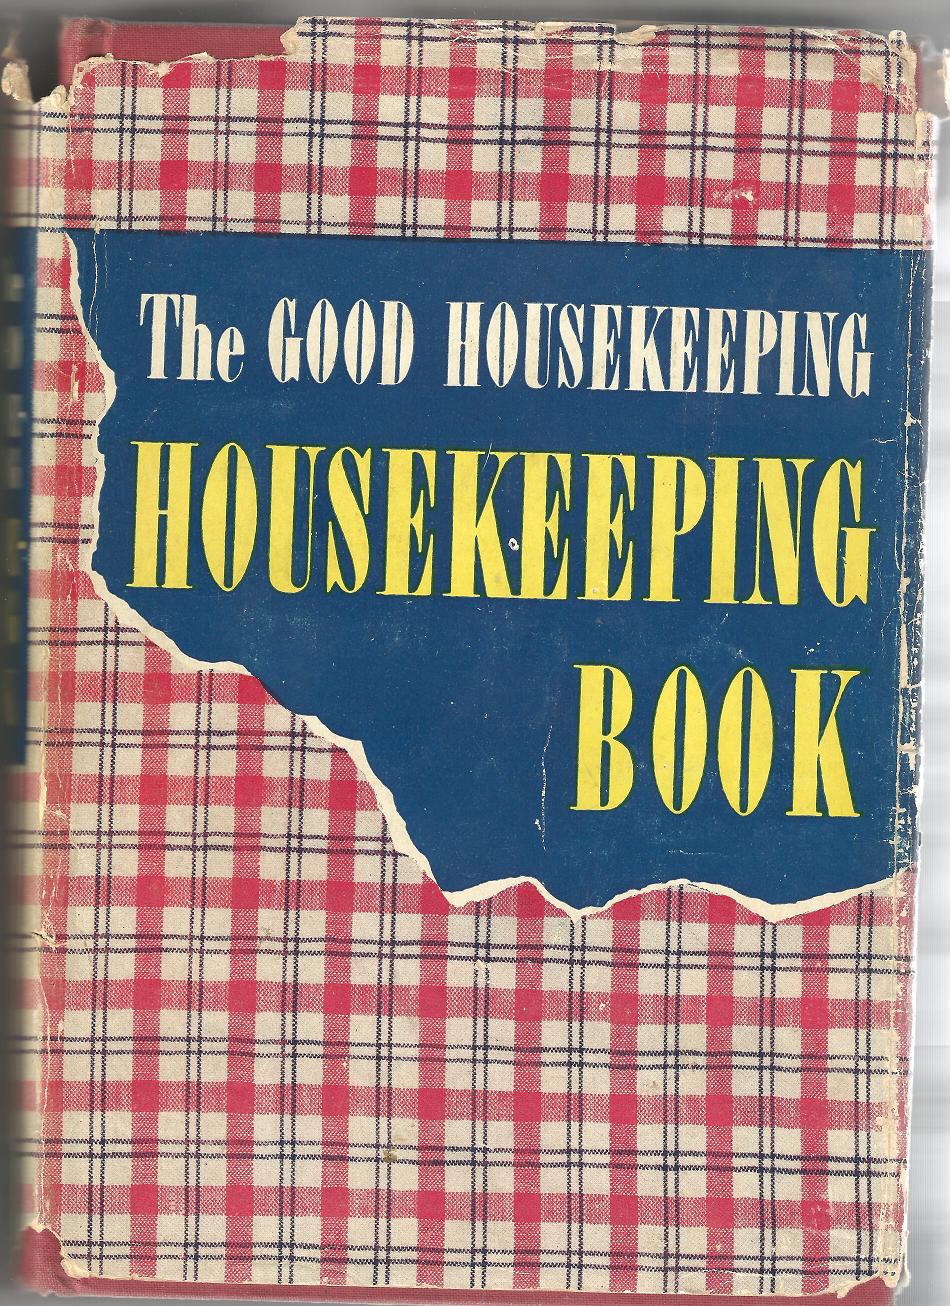 Image result for the good housekeeping housekeeping book 1947